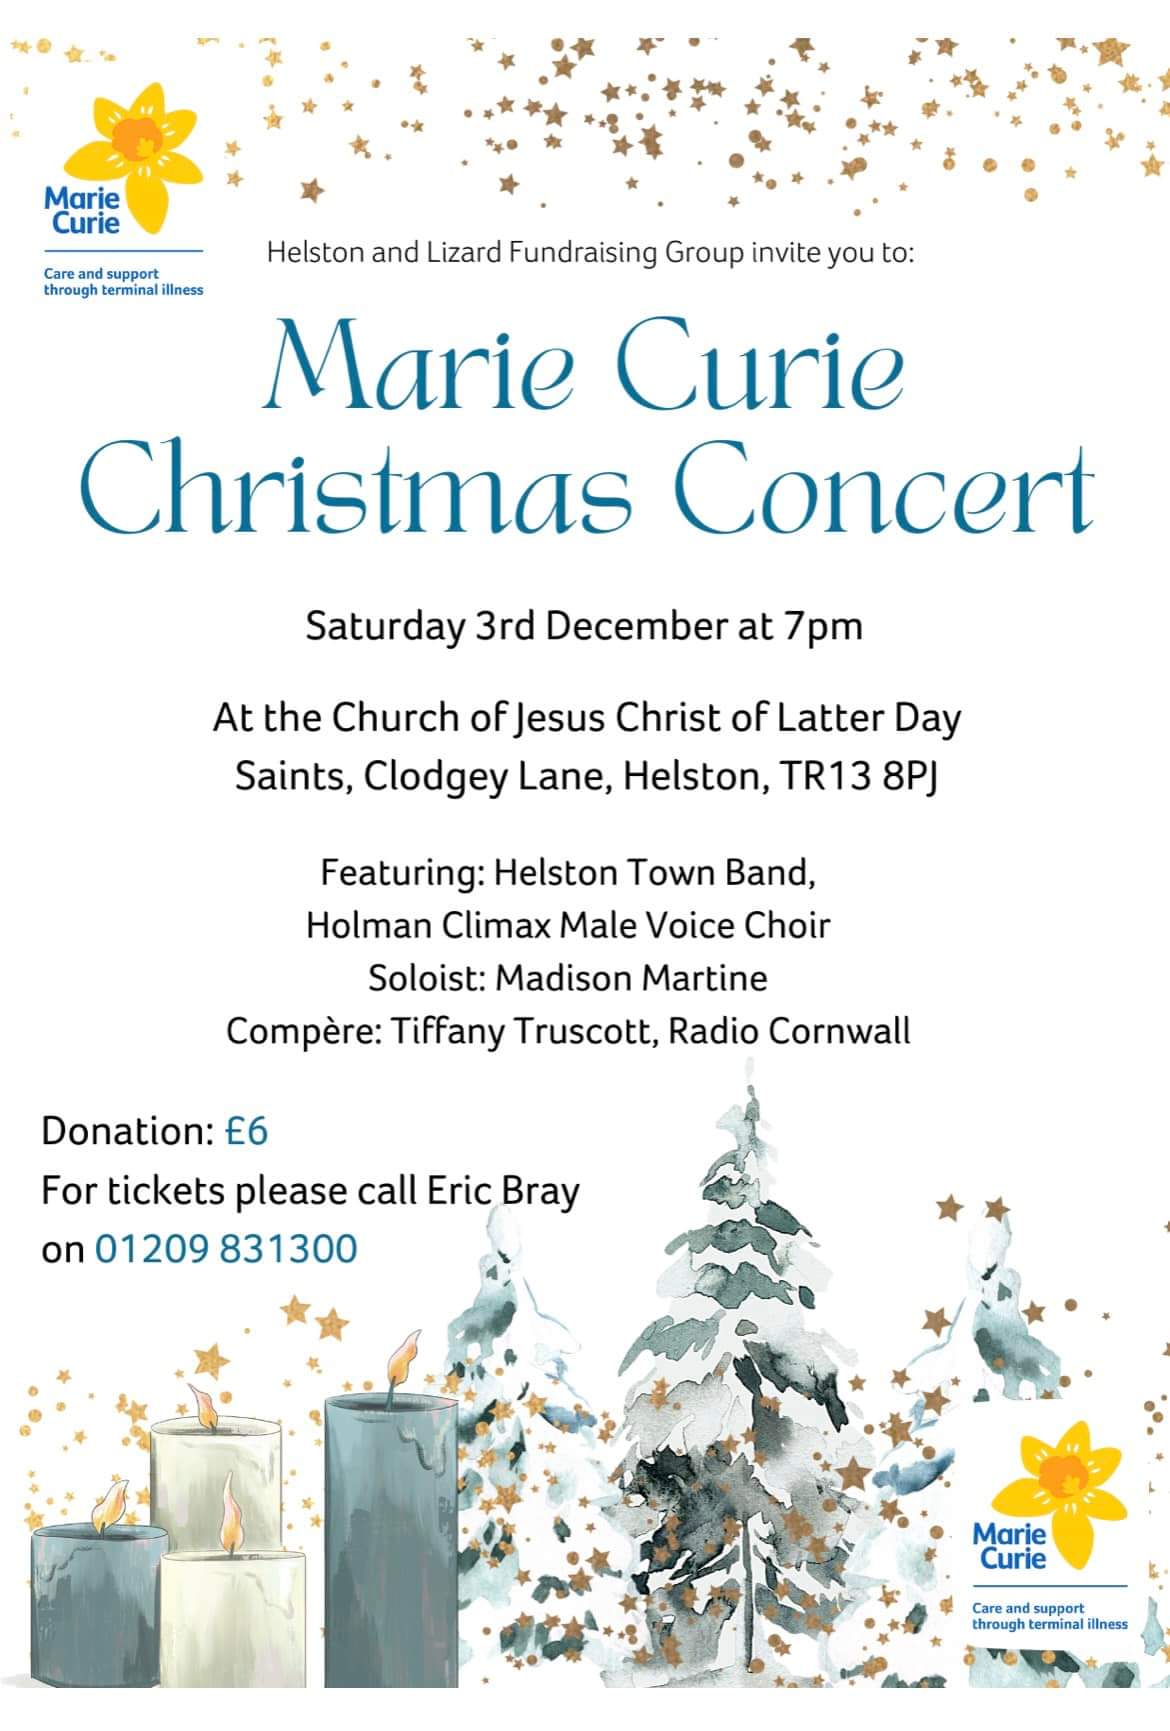 Church of Jesus Christ Latter Day Saints Christmas Concert in Aid of Marie Curie